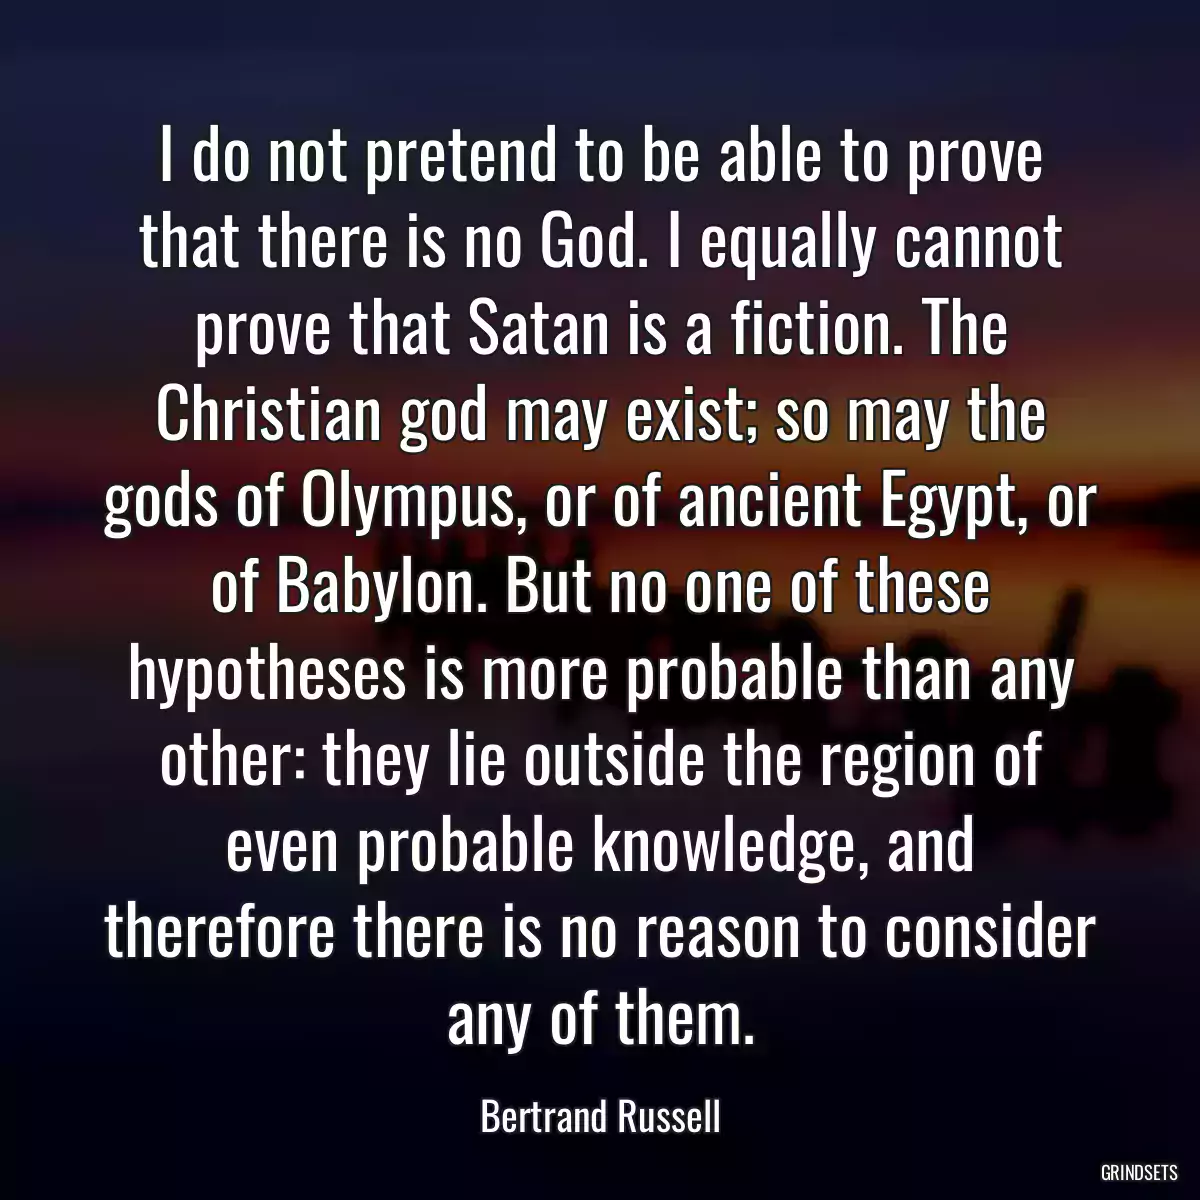 I do not pretend to be able to prove that there is no God. I equally cannot prove that Satan is a fiction. The Christian god may exist; so may the gods of Olympus, or of ancient Egypt, or of Babylon. But no one of these hypotheses is more probable than any other: they lie outside the region of even probable knowledge, and therefore there is no reason to consider any of them.